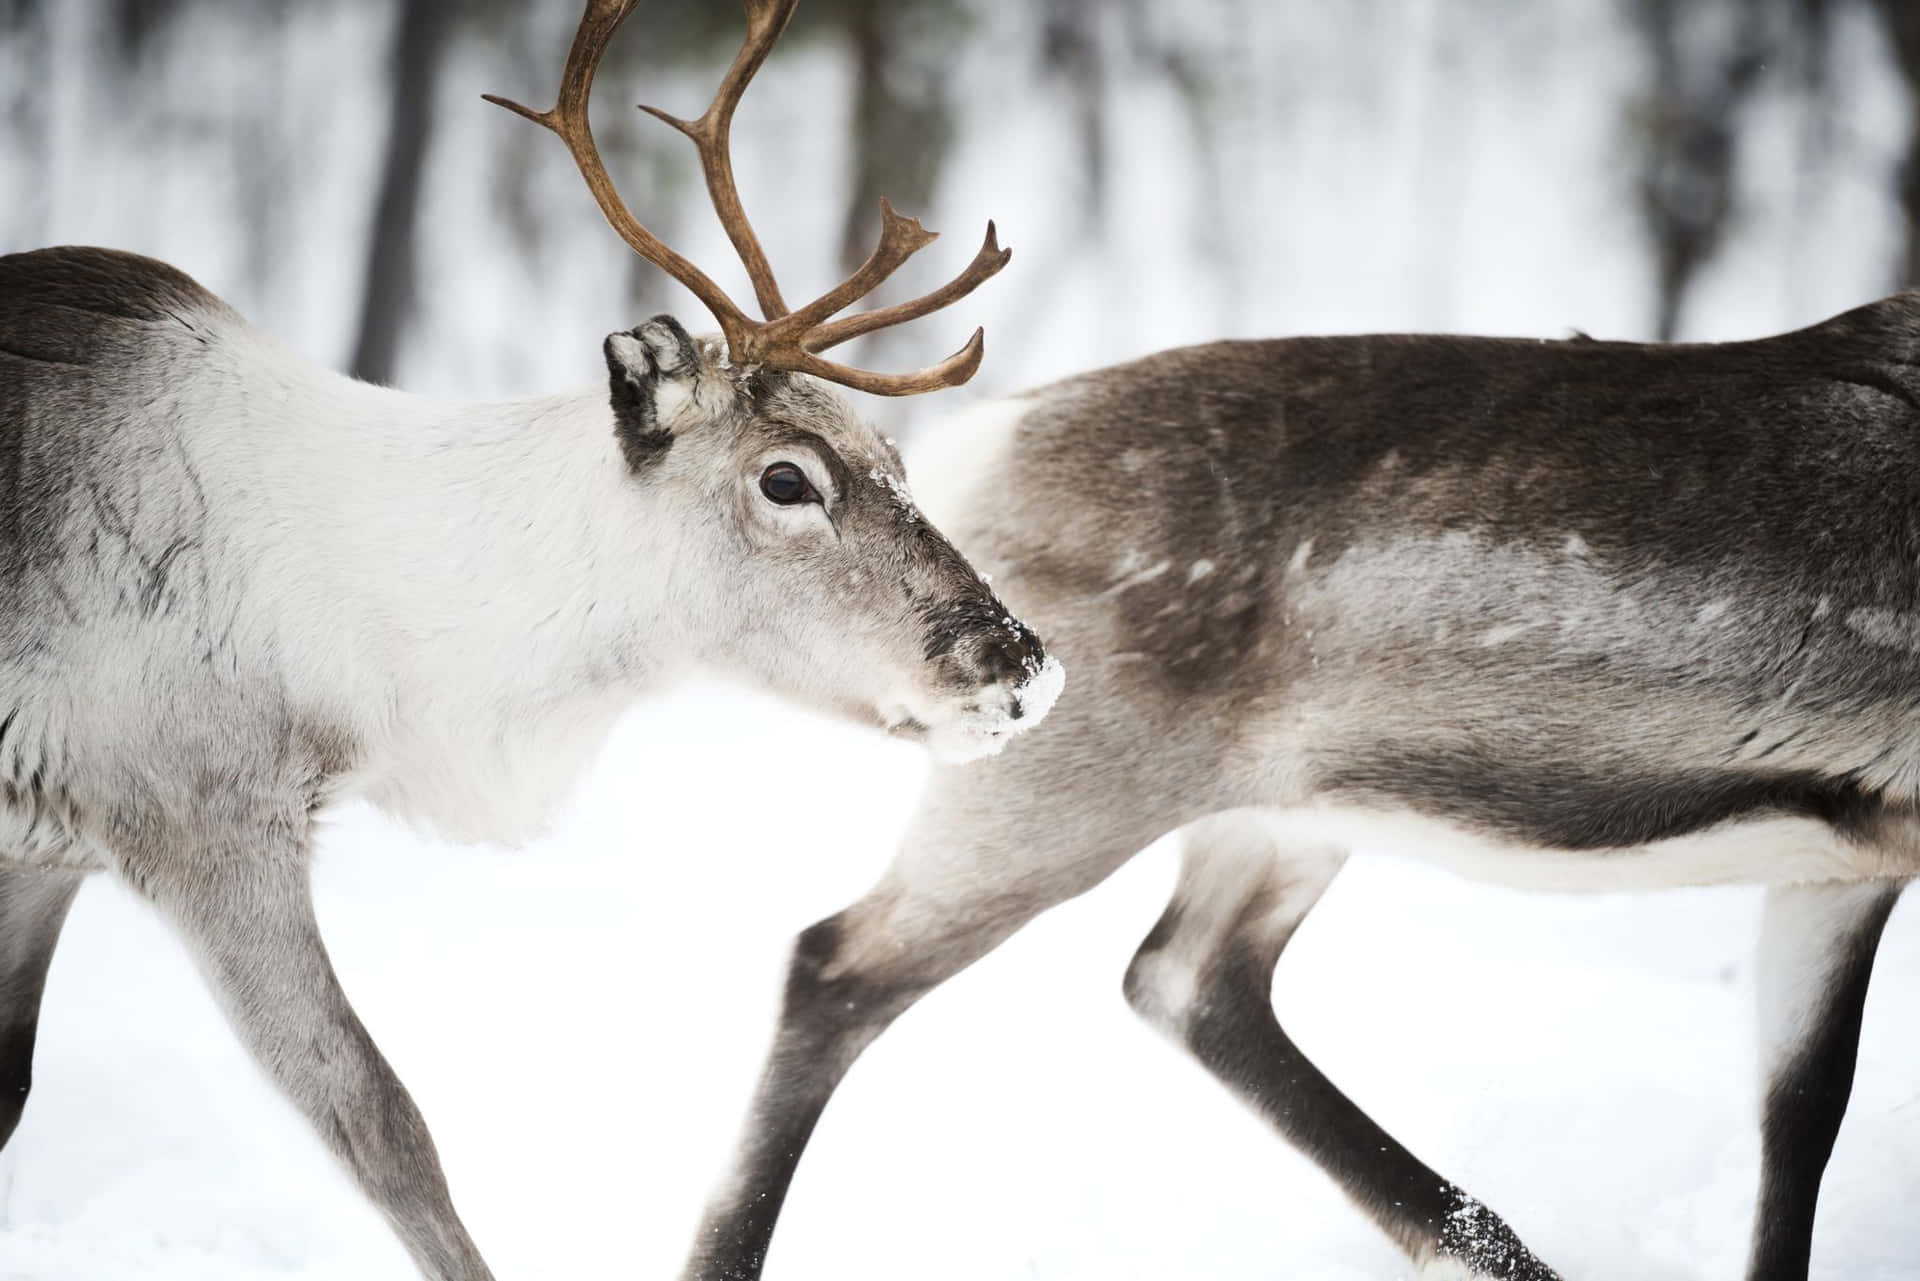 A reindeer rides through a snow-covered forest.